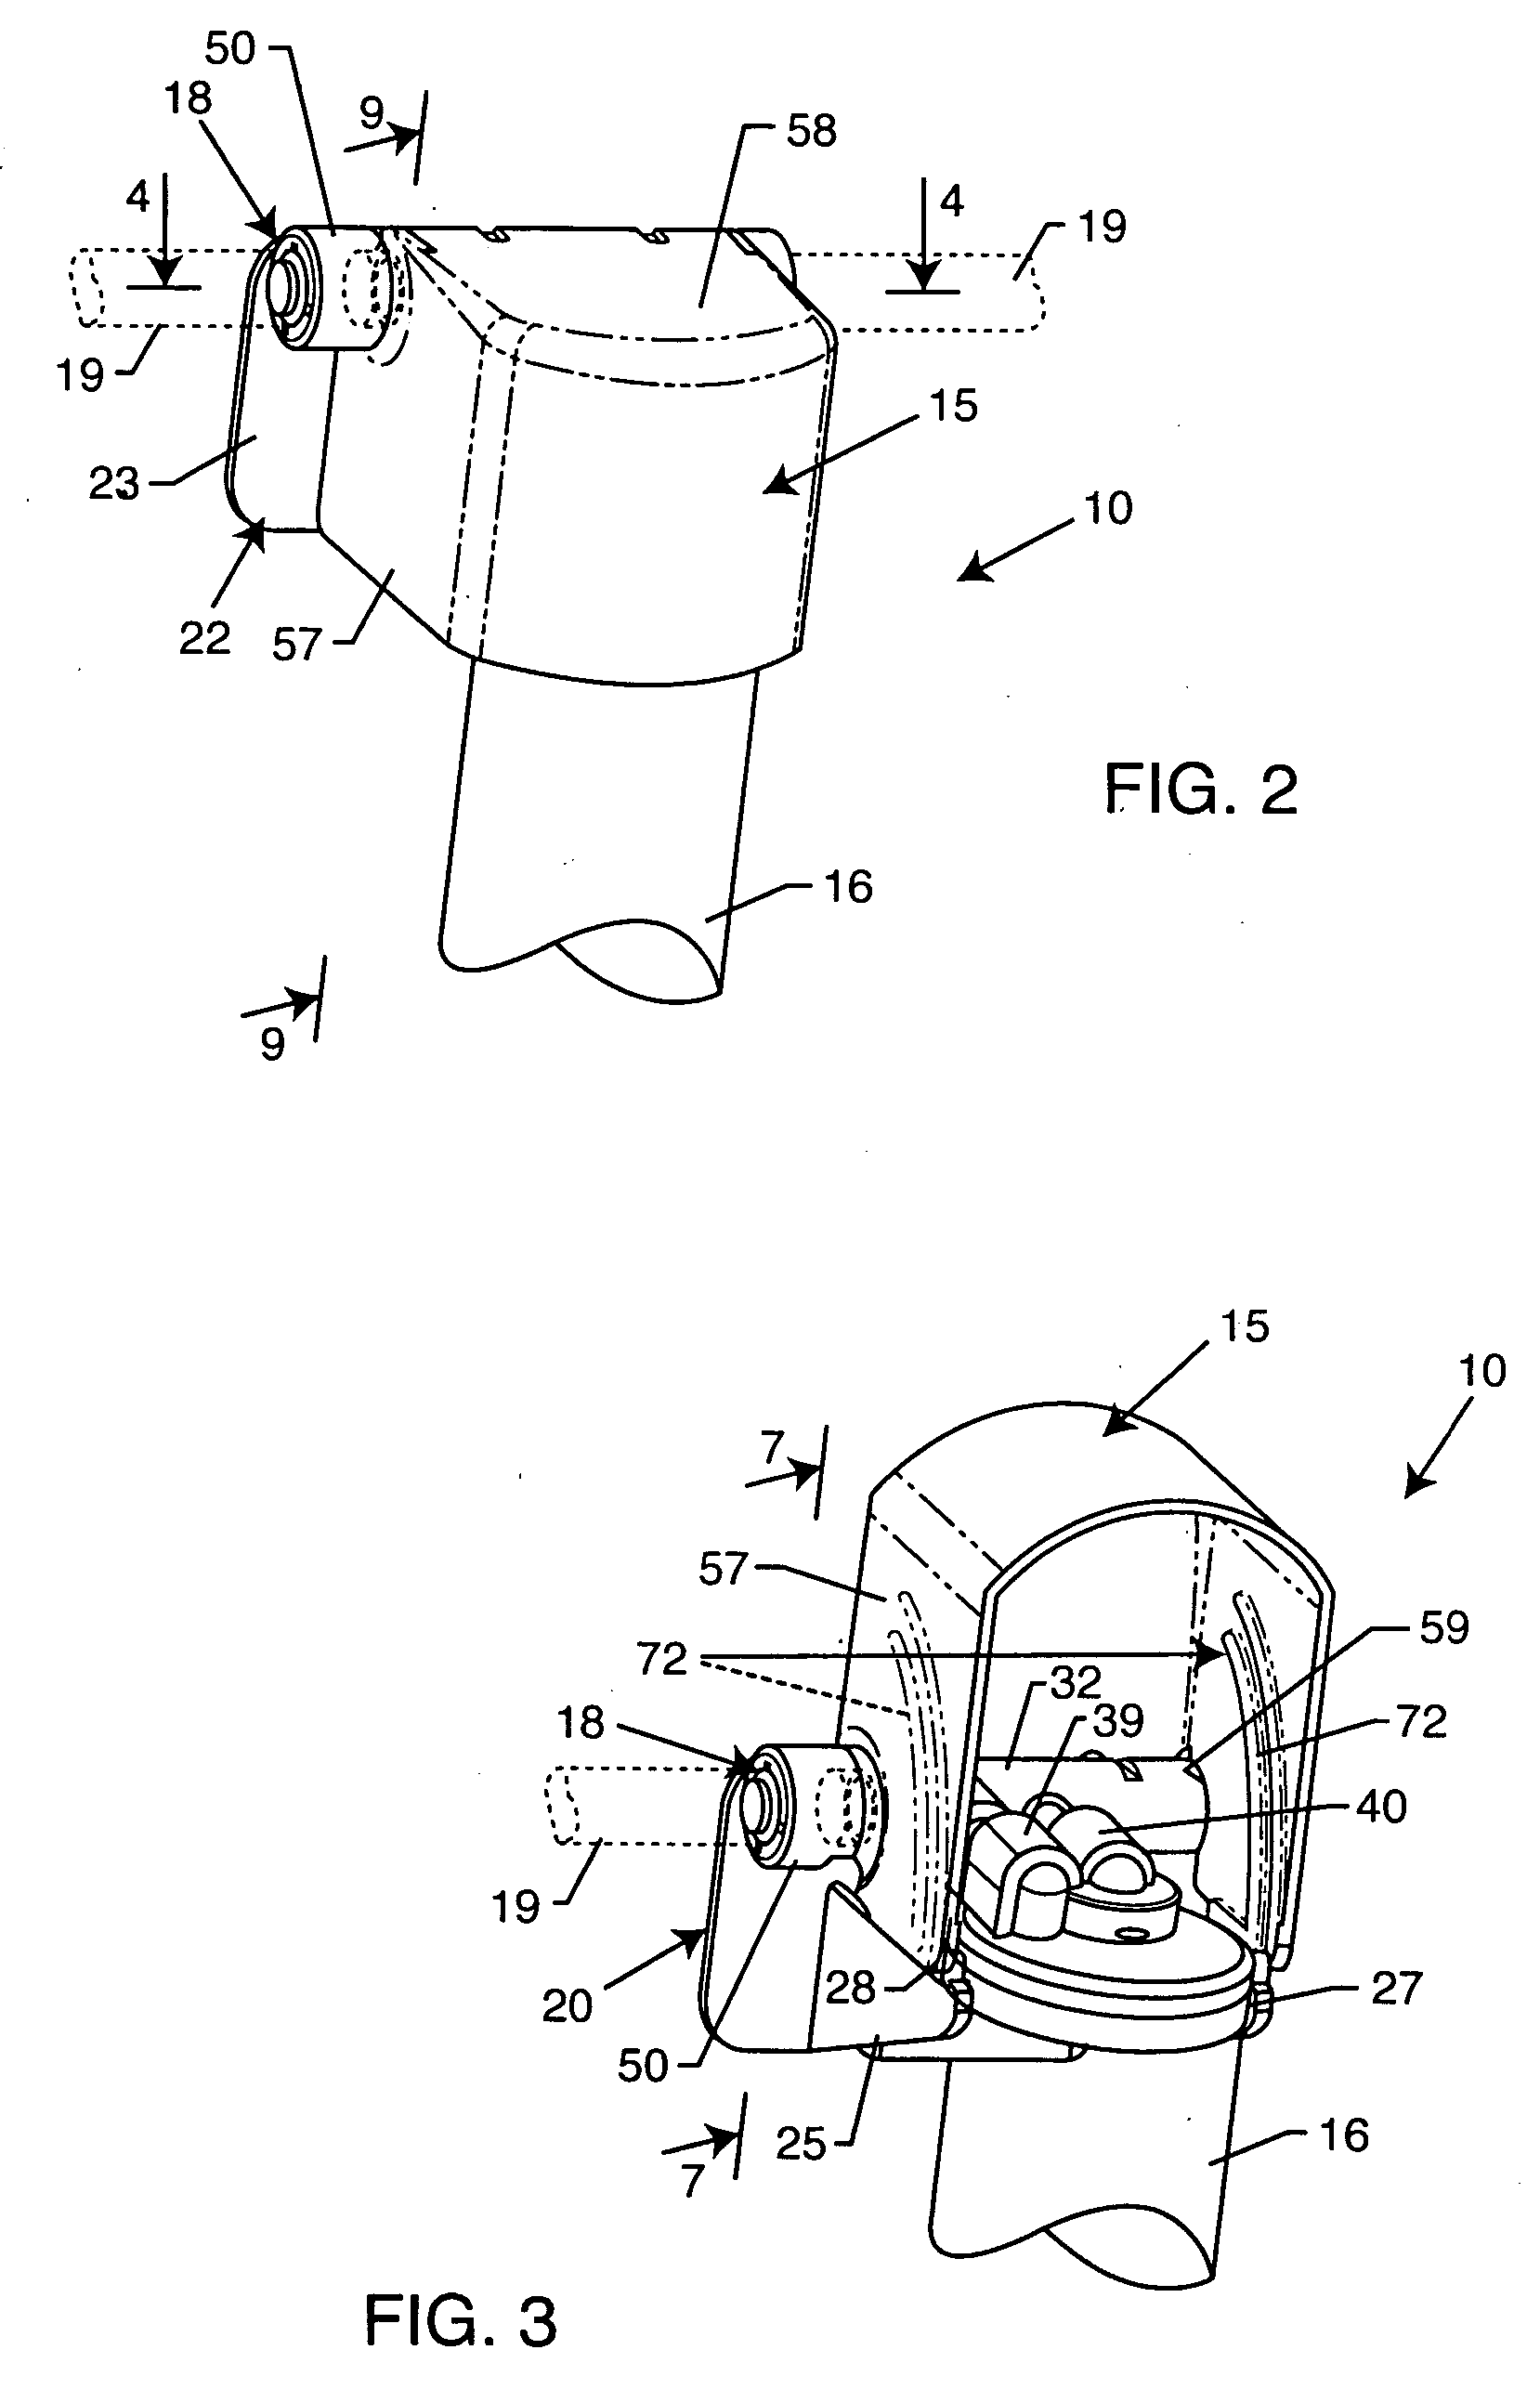 Filter cartridge and manifold for a water purification system